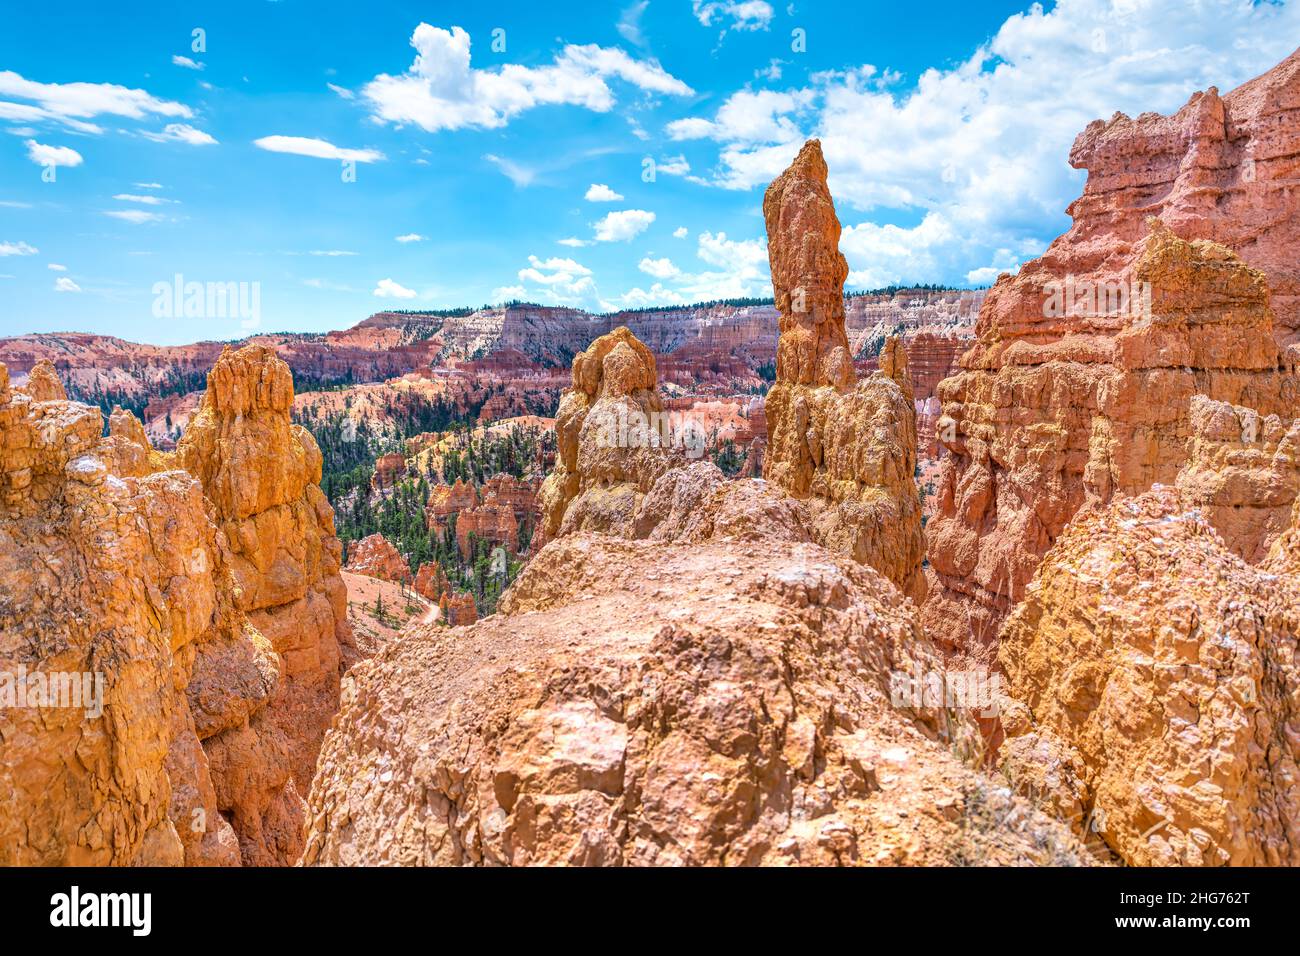 High angle above view of hoodoos orange rock formations spires at Bryce Canyon National Park in Utah Queens Garden Navajo Loop trail hiking Stock Photo